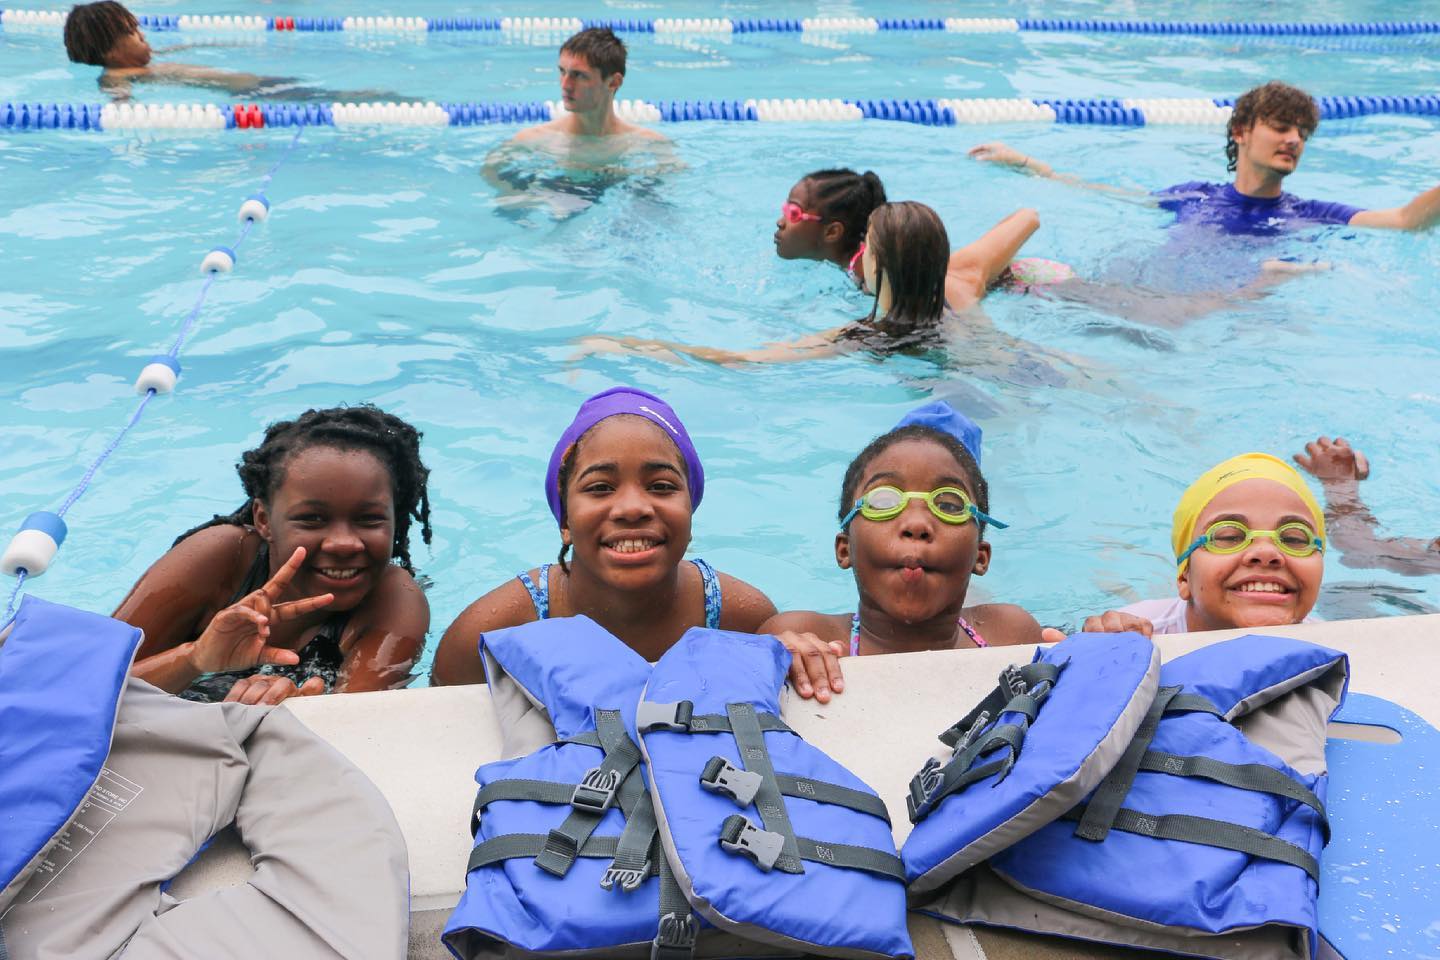 Four young girls receive swimming lessons at Memphis YMCA pool